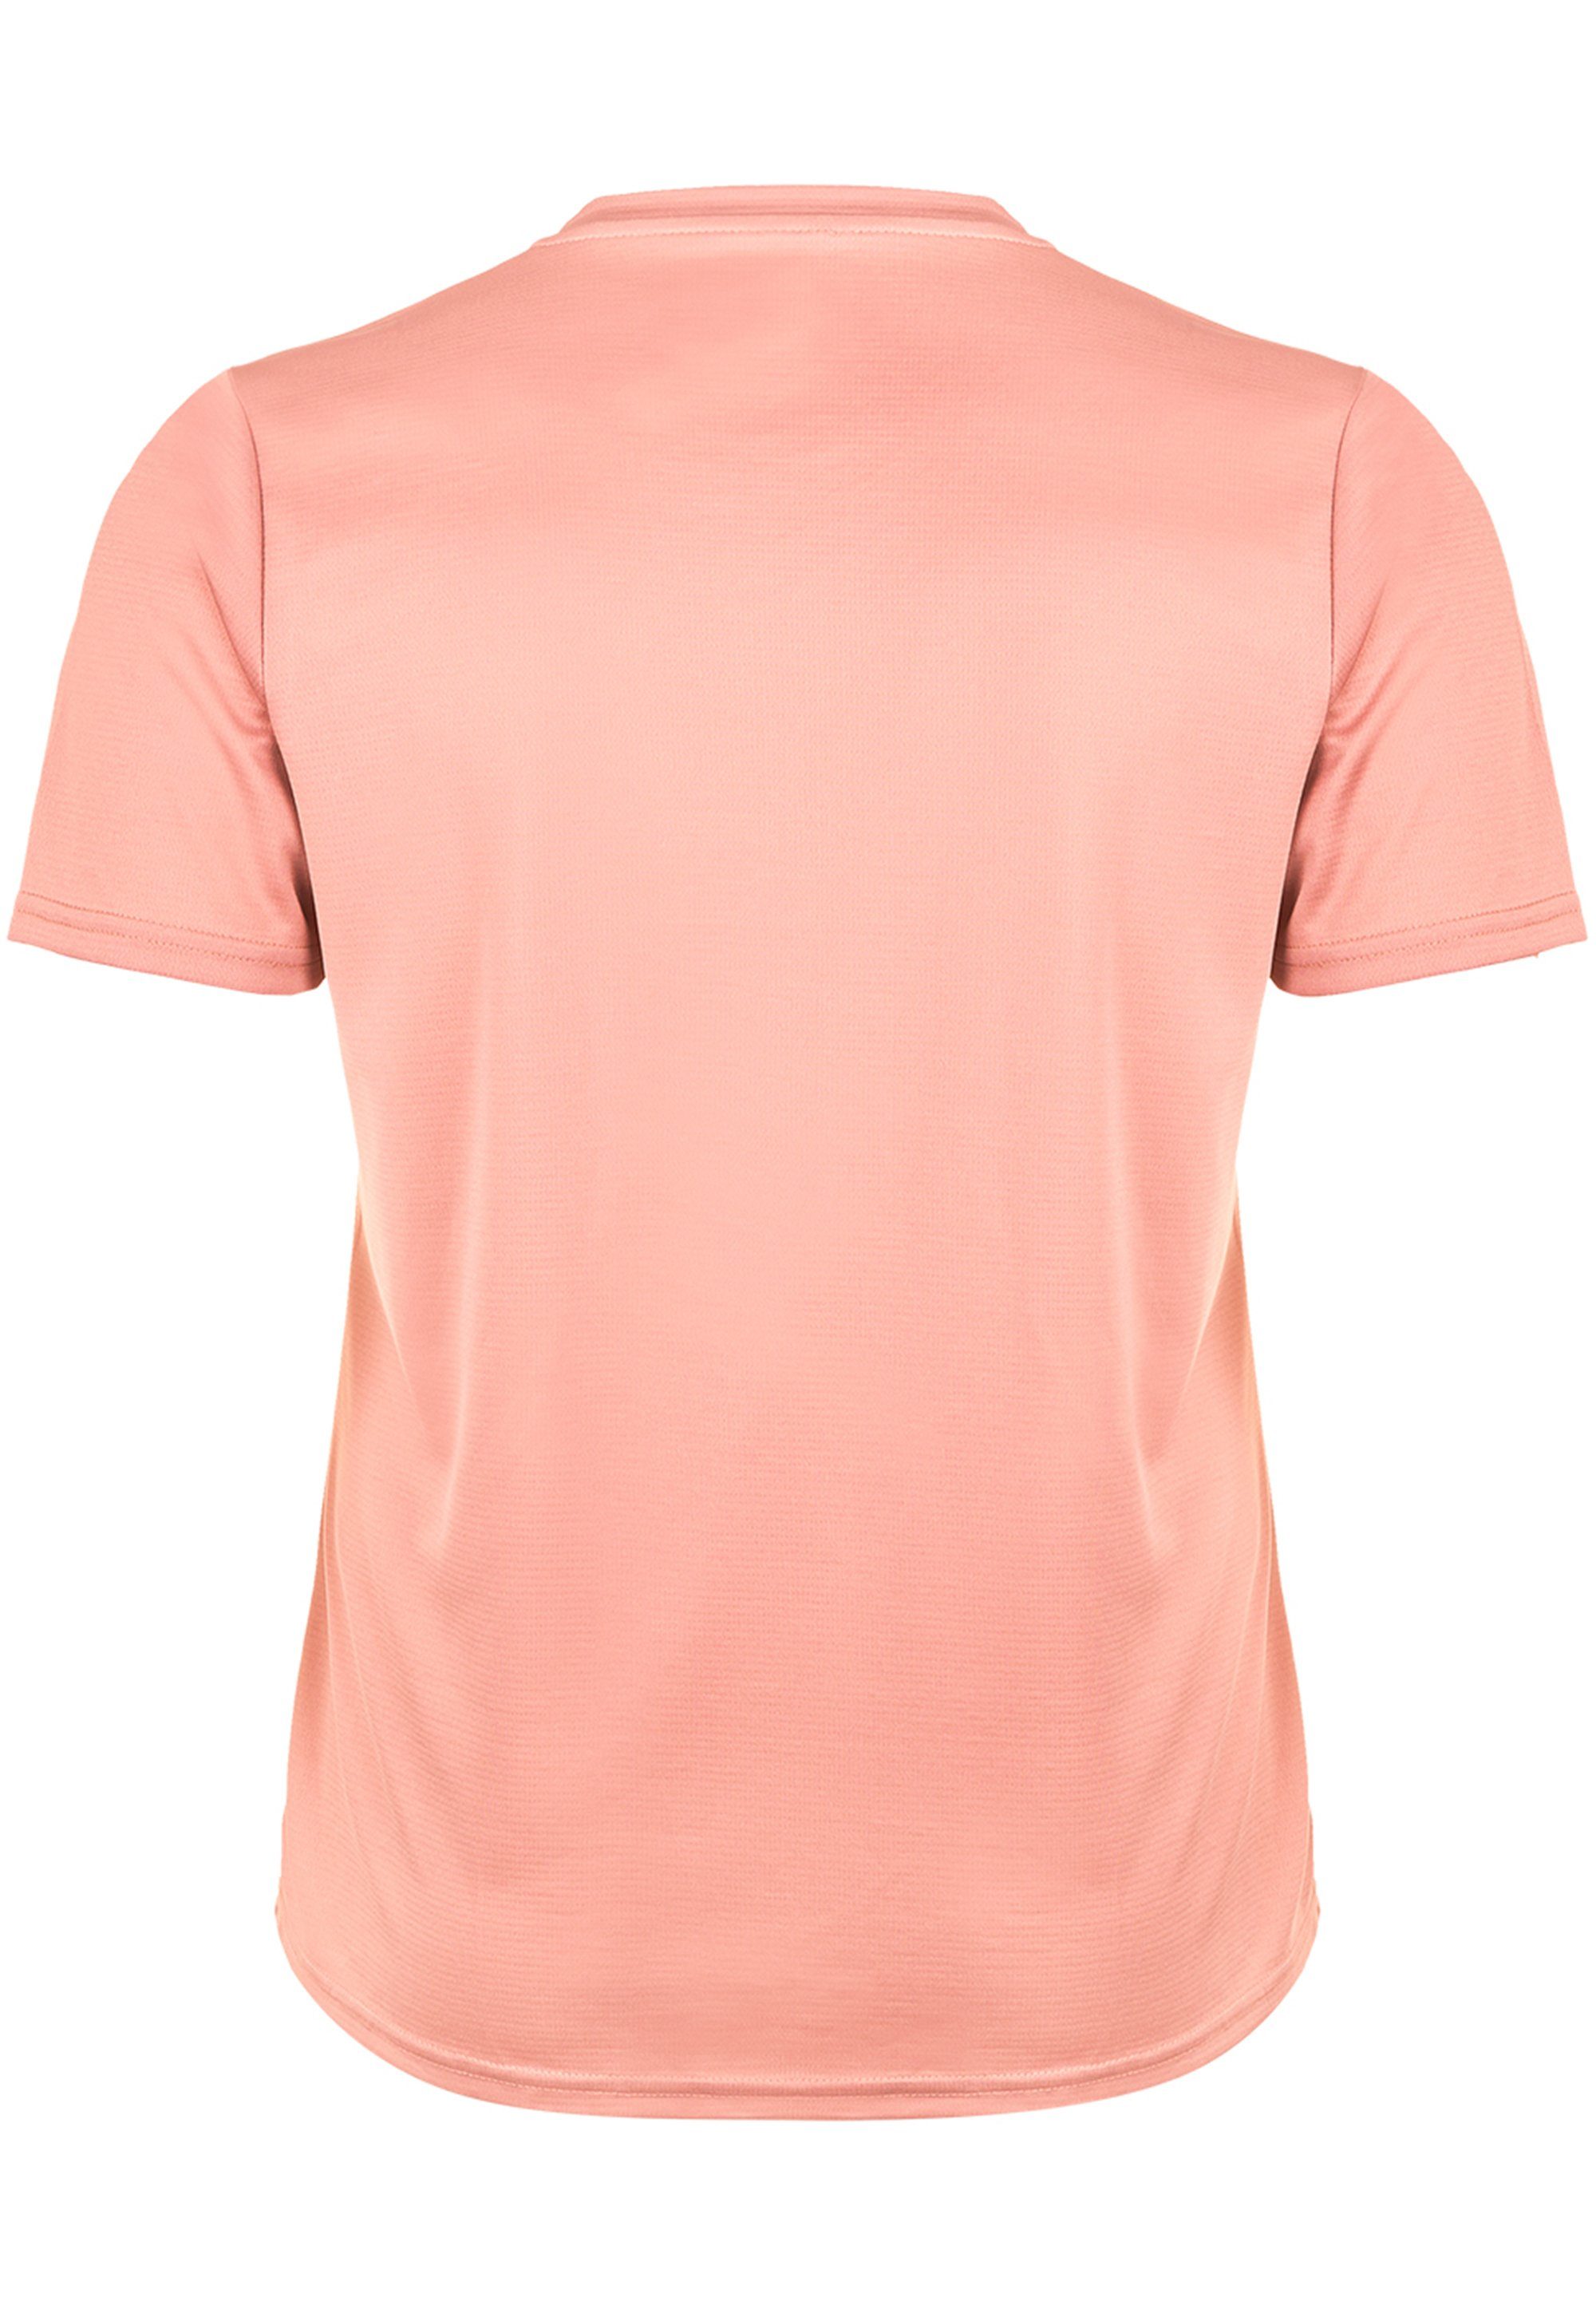 Funktionsshirt ANNABELLE (1-tlg) Endurance by Q DRY-Technologie QUICK rosa-pastell mit